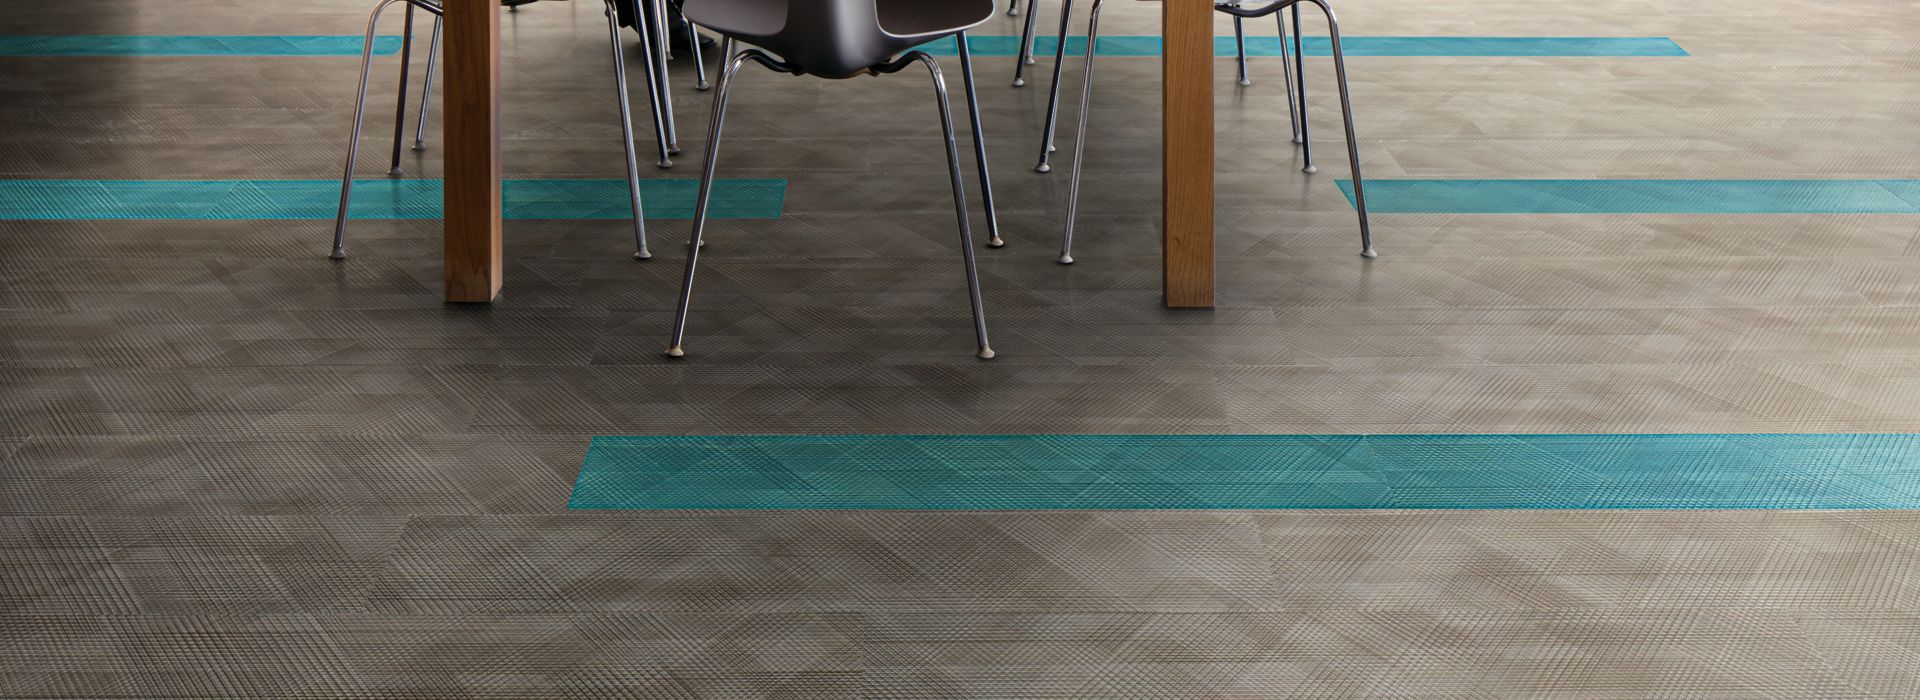 Interface Drawn Lines LVT in cafeteria setting with long table and chairs  imagen número 1